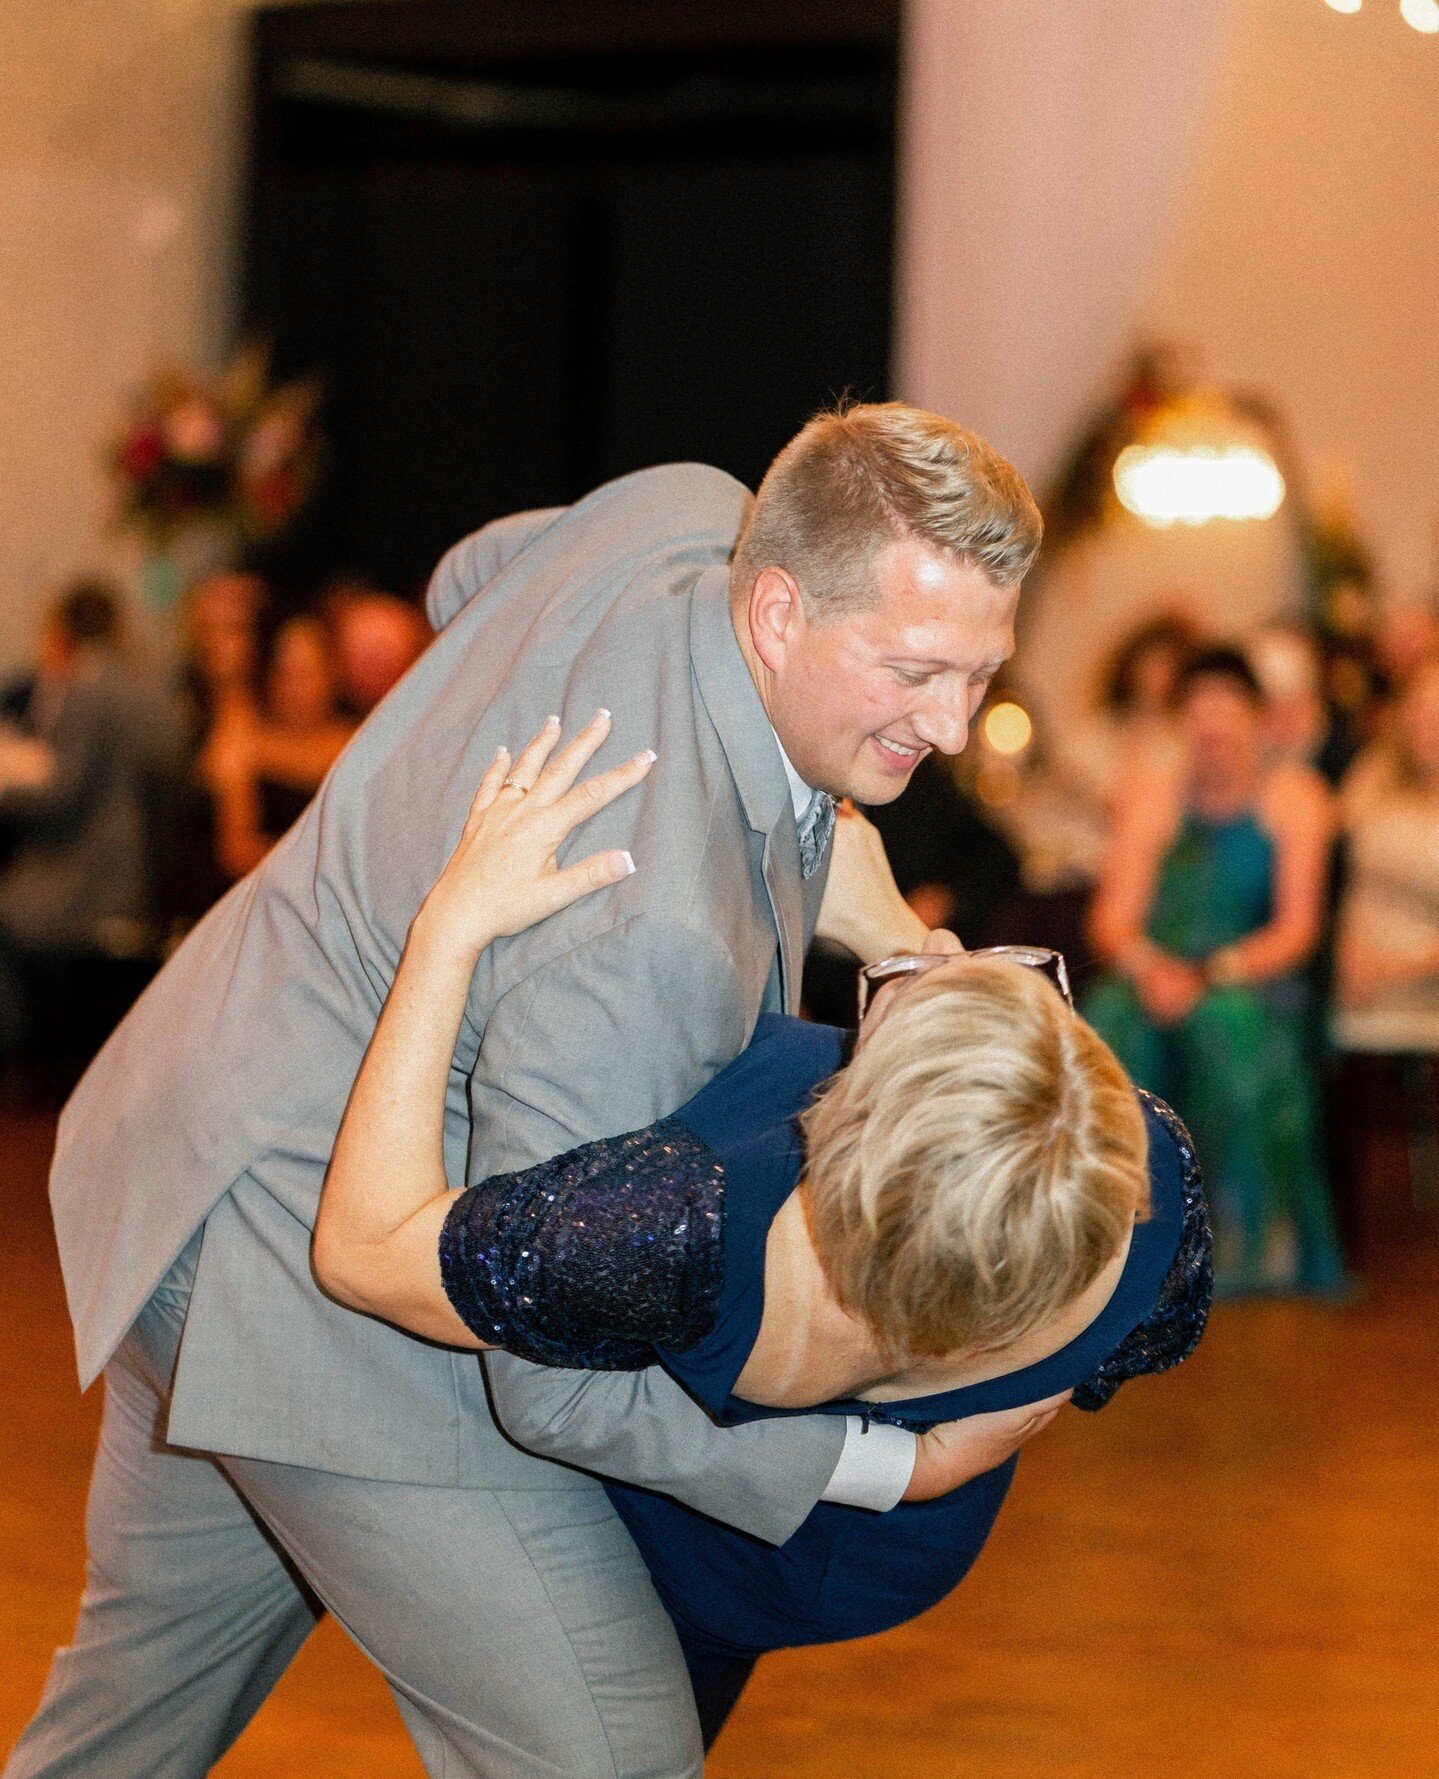 We love a good mother+son dance, especially when it includes a dip! ⁠
.⁠
.⁠
.⁠
📸: @trinitytolbertphoto⁠
📒: @premierpartyplanners⁠
🎥: @timelesscarolinas⁠
🎶: @djonestheone⁠
🍰: @publix⁠
💐: @lilacfloraldecor⁠
Rentals: @curatedeventsraleigh⁠
Hair: @